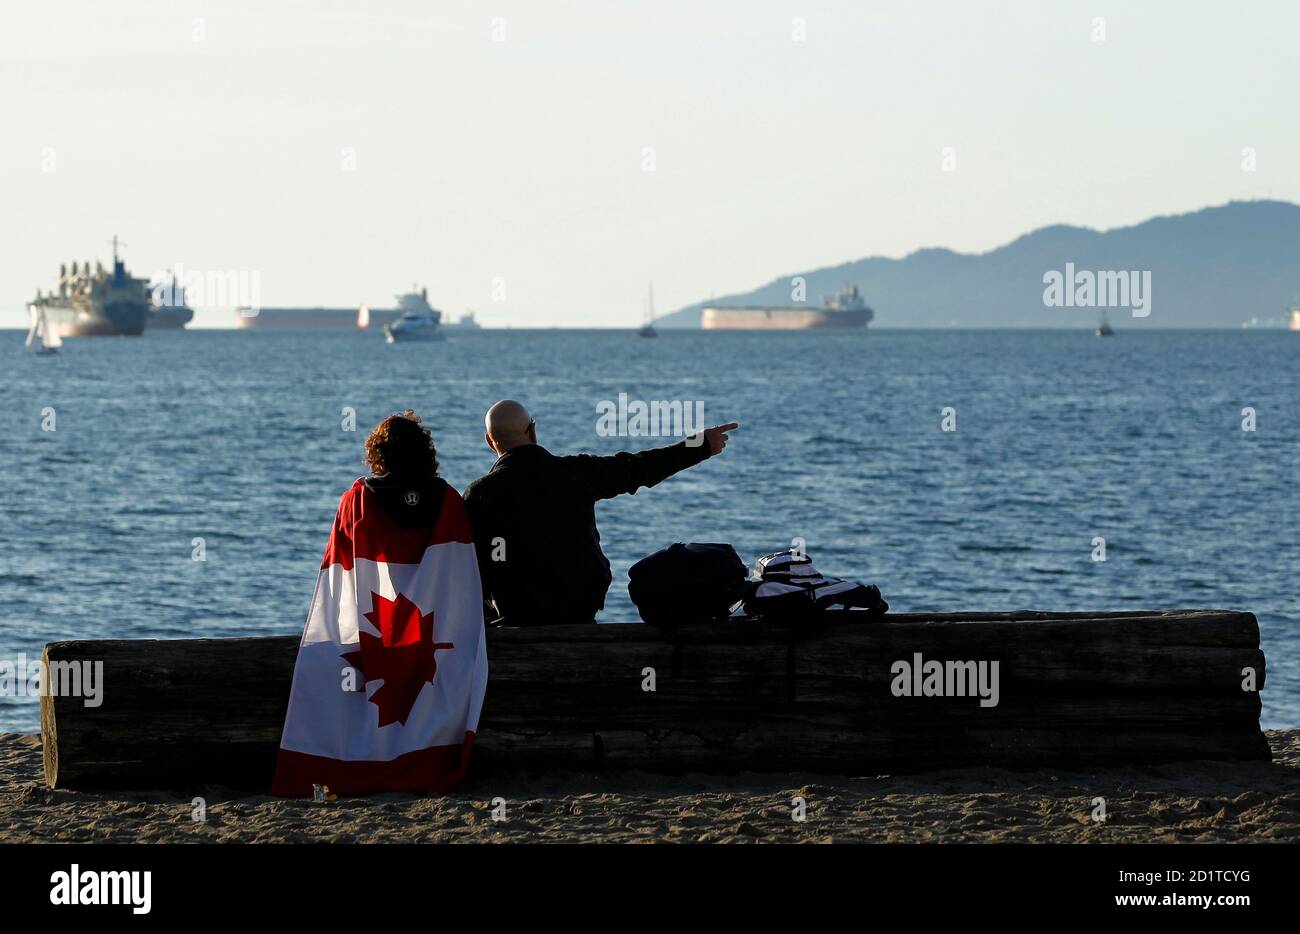 Canadian Olympic fans take a break to enjoy a spring-like day at Vancouver's English Bay during the Vancouver 2010 Winter Olympics February 19, 2010.  REUTERS/Mike Blake (CANADA) Stock Photo